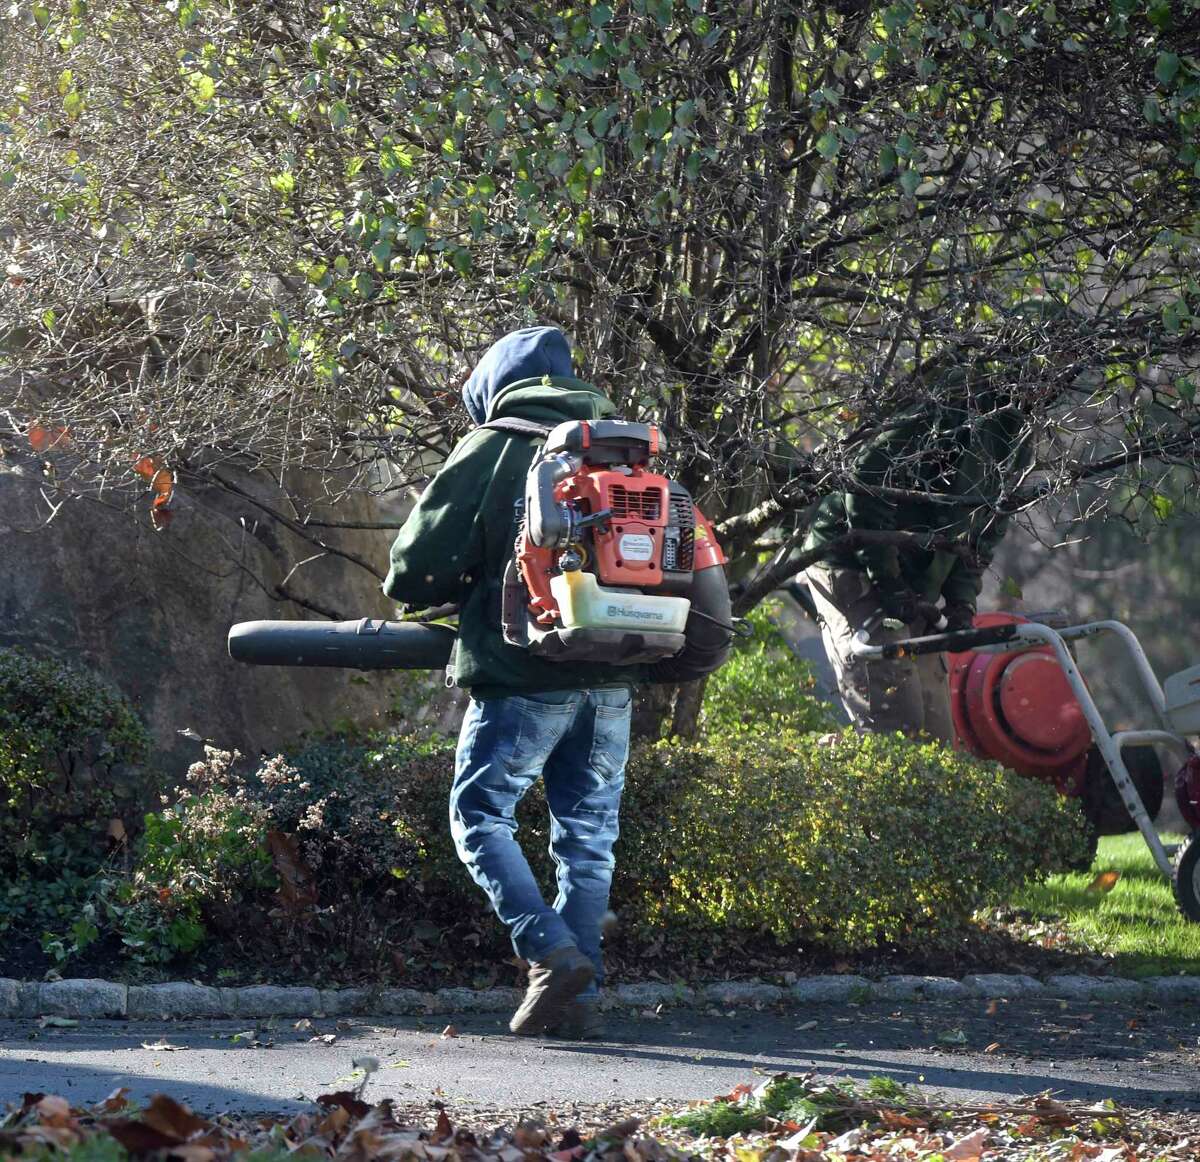 A worker for Signature Landscaping, in Norwalk, uses a gas-powered leaf blower during fall cleanup at a Wilton condo complex. Wednesday, November 23, 2022, Wilton, Conn.